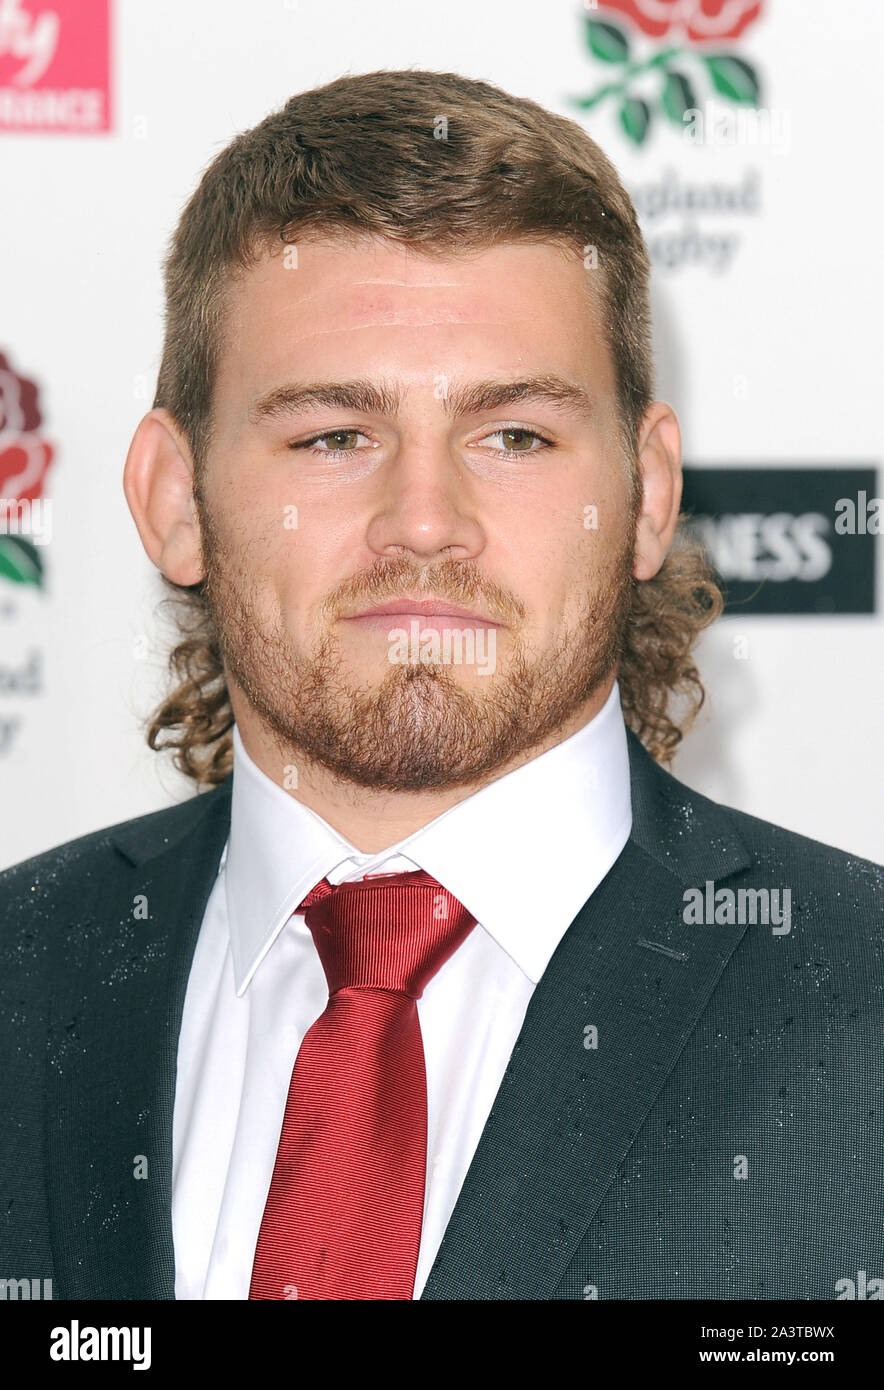 Photo Must Be Credited ©Jeff Spicer/Alpha Press 079852 05/08/2015 Luke Cowan-Dickie at the Carry Them Home Rugby Dinner held at Grosvenor House London Stock Photo